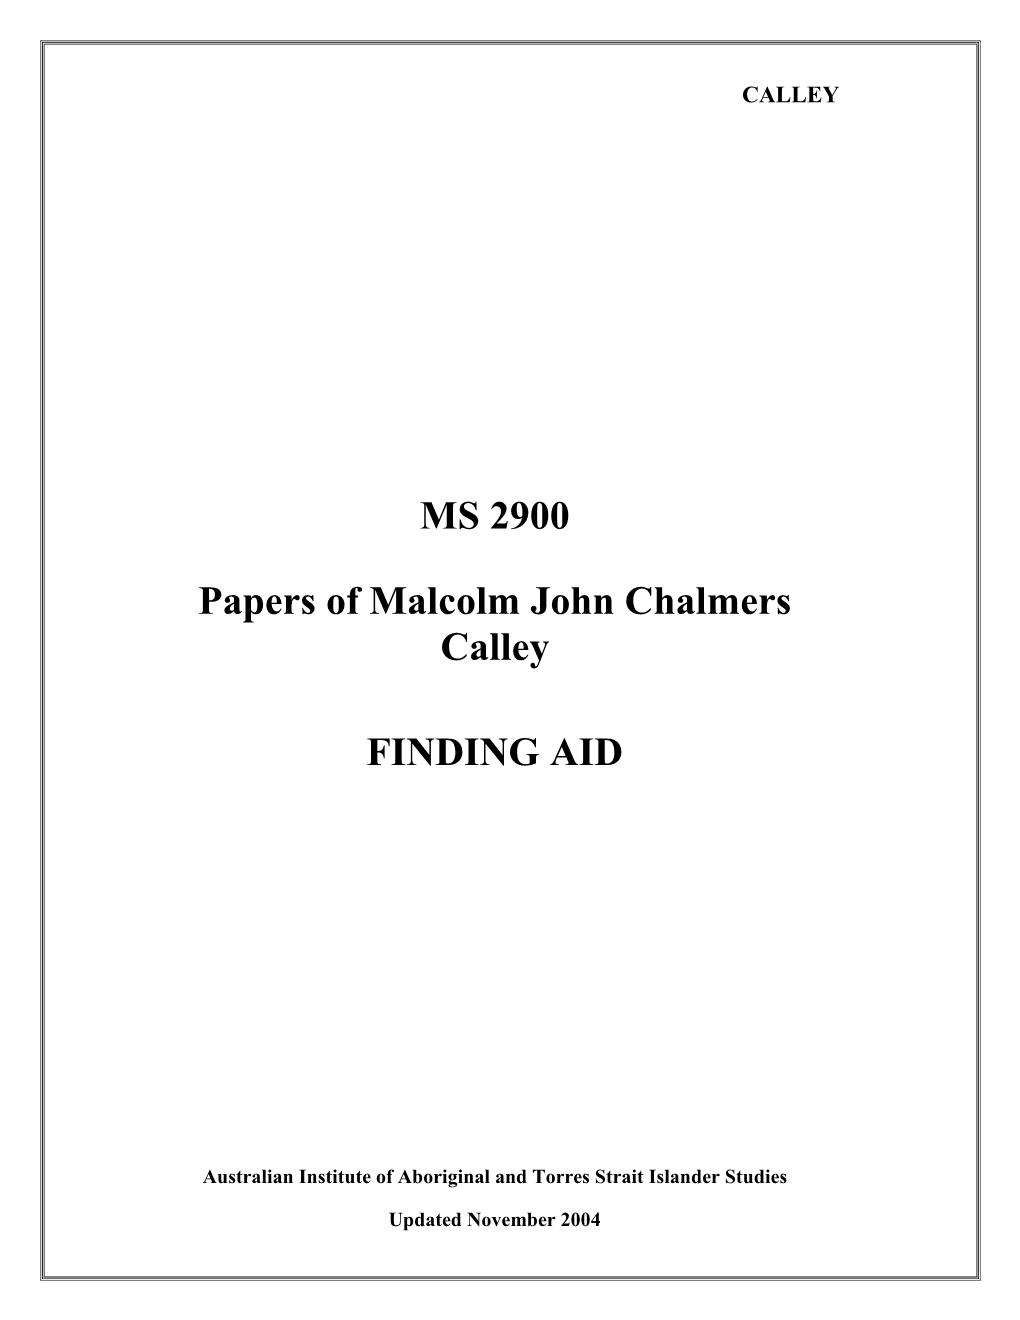 MS 2900 Papers of Malcolm John Chalmers Calley FINDING